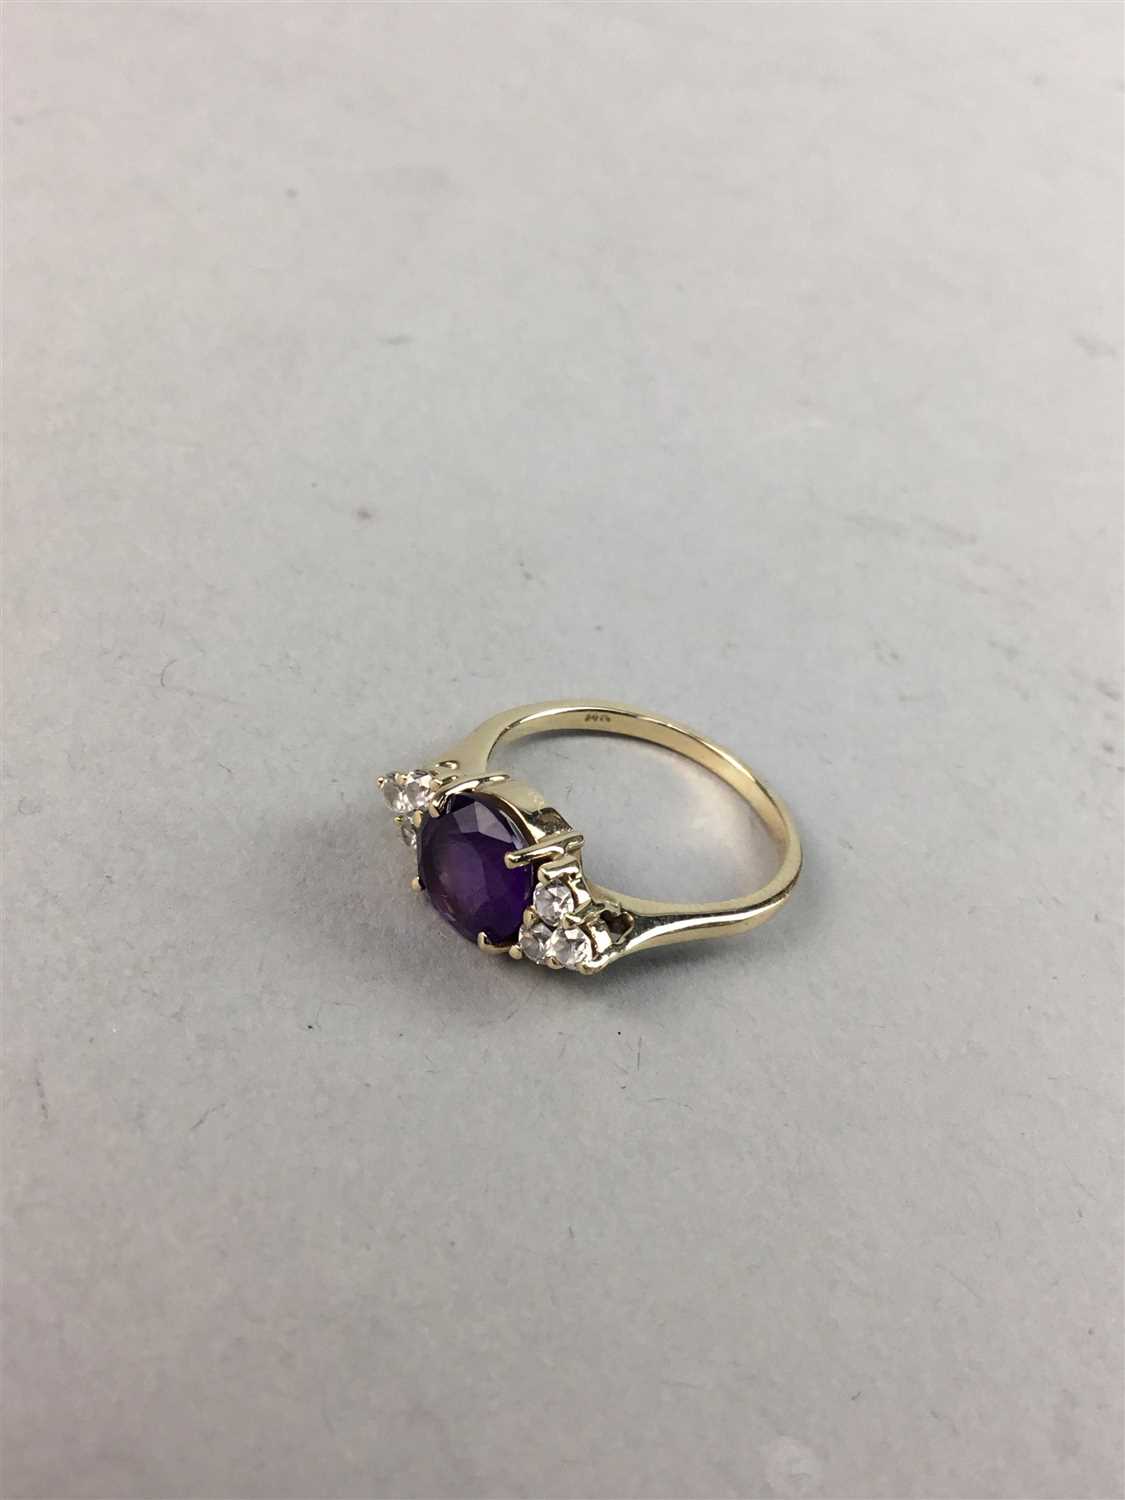 Lot 219 - A 14k GOLD RING